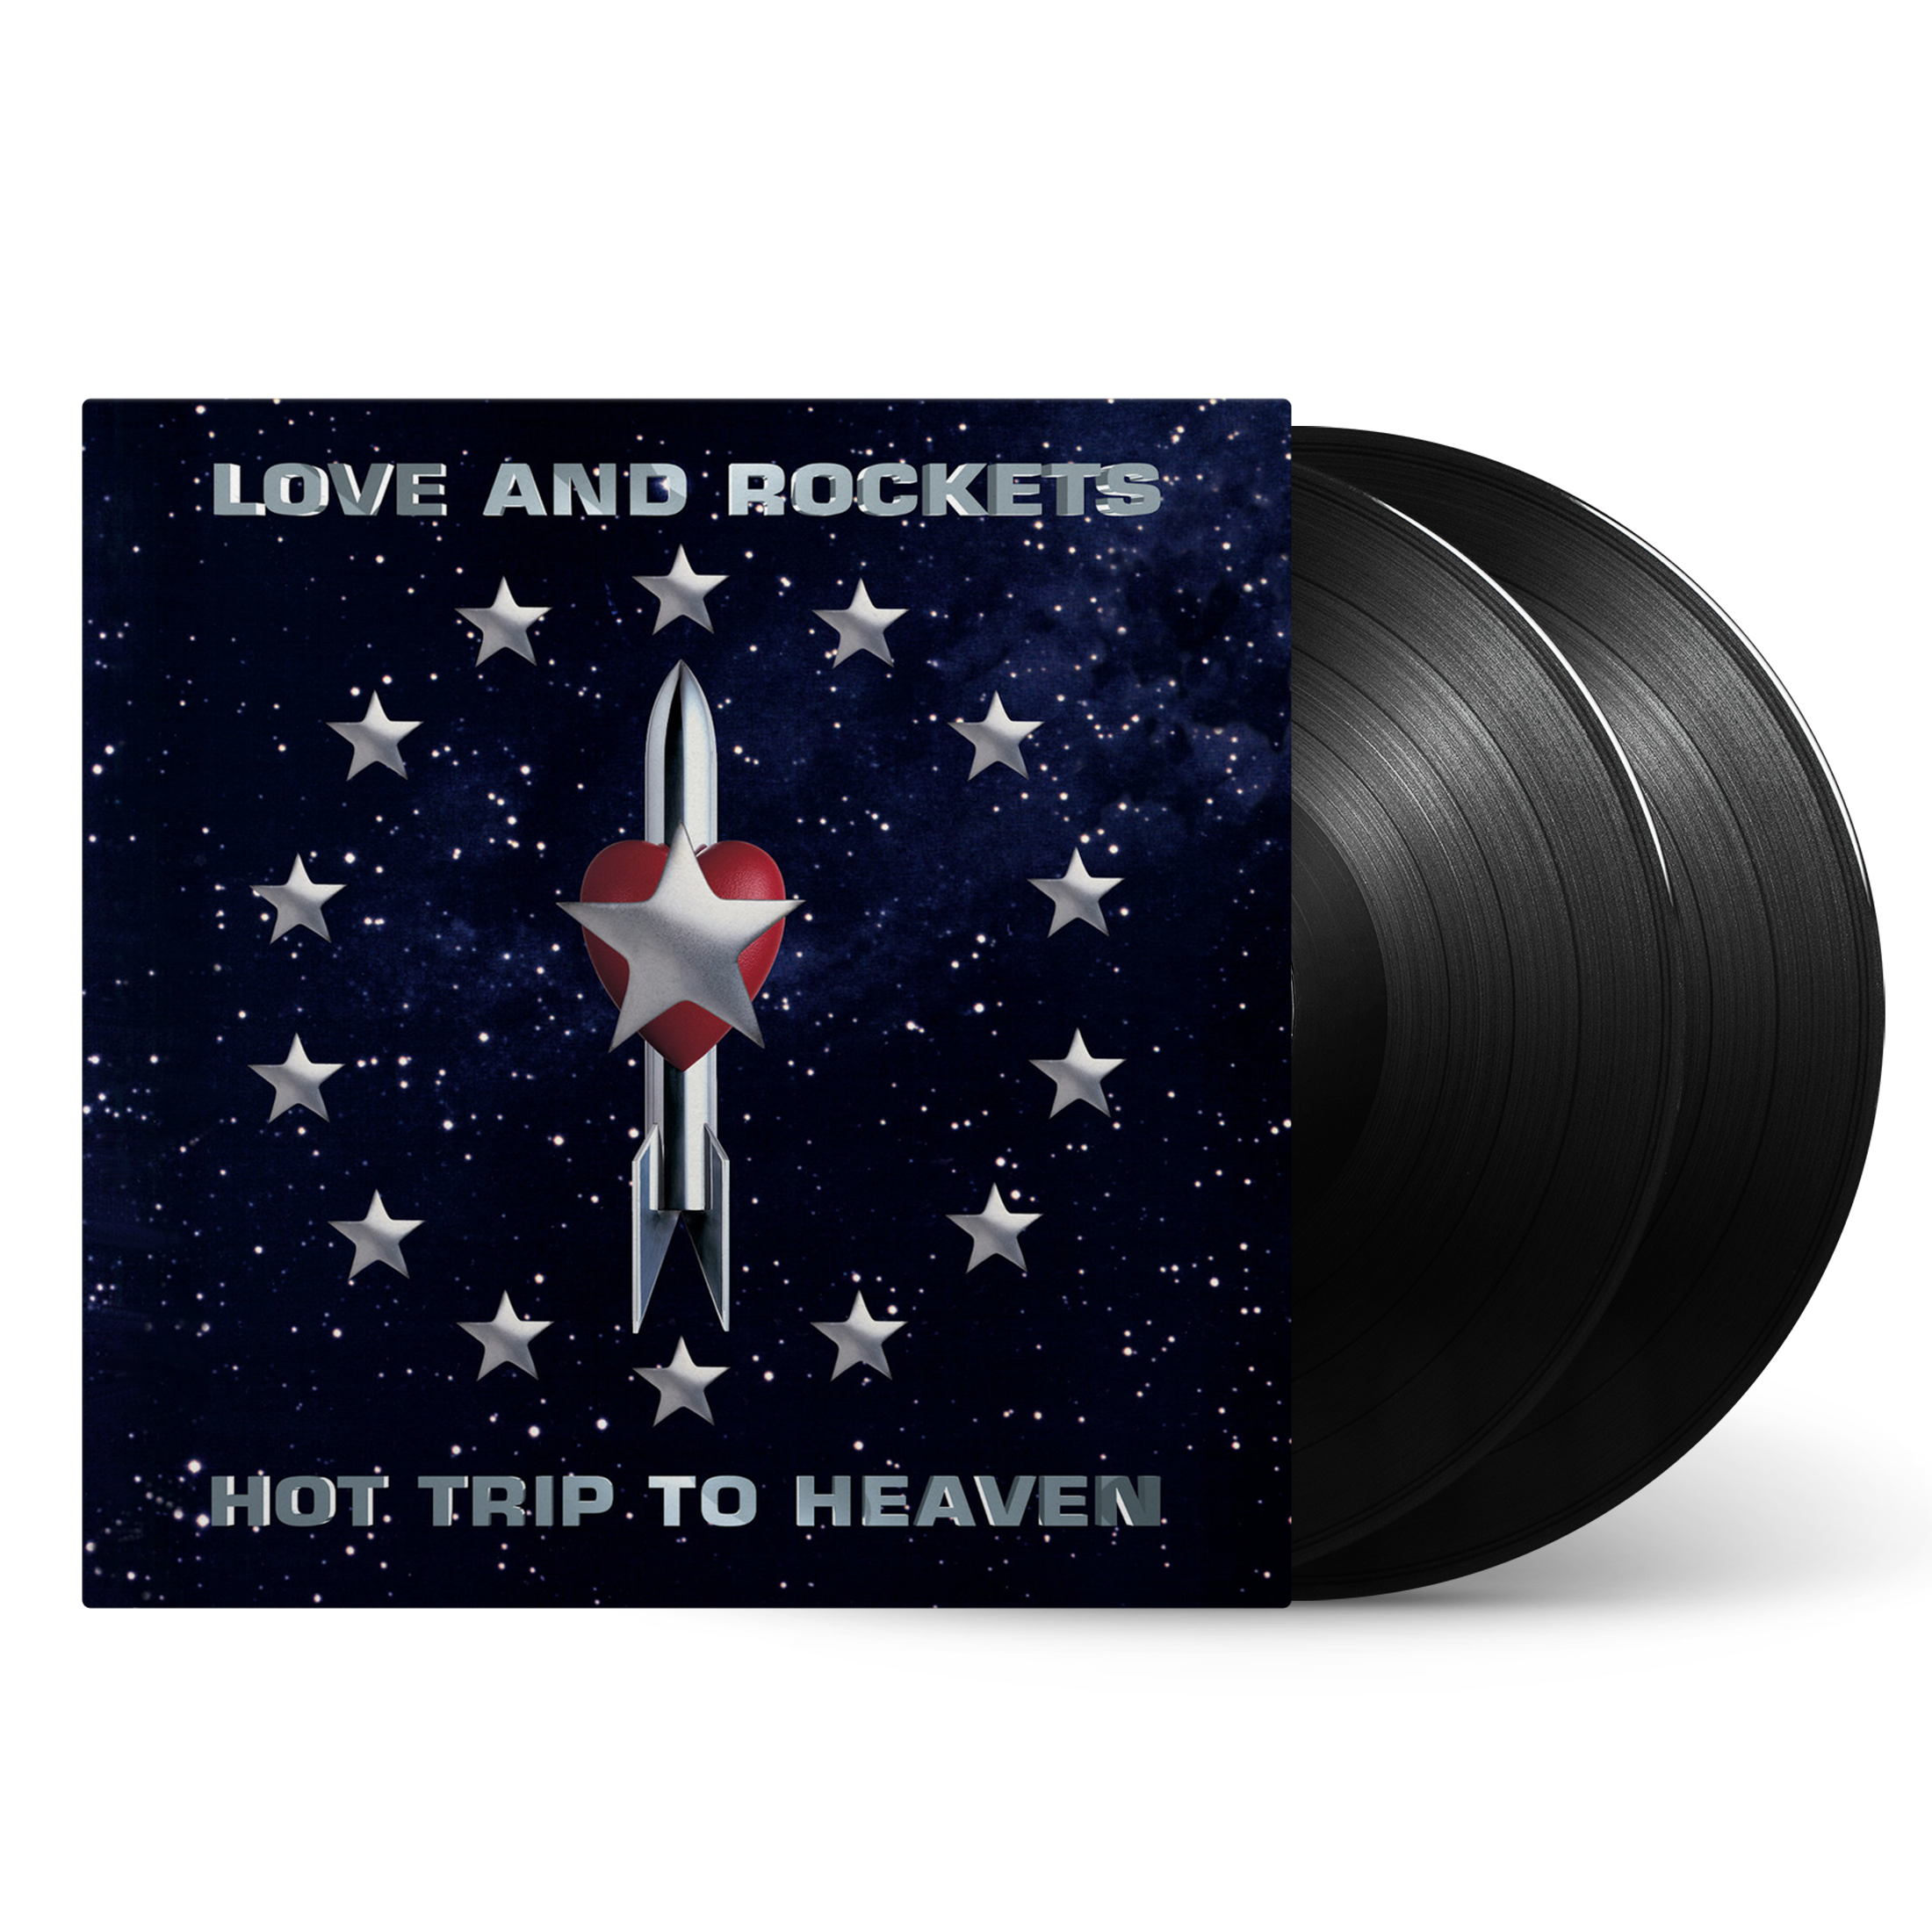 Love and Rockets - Hot Trip To Heaven (Expanded Version): Vinyl 2LP